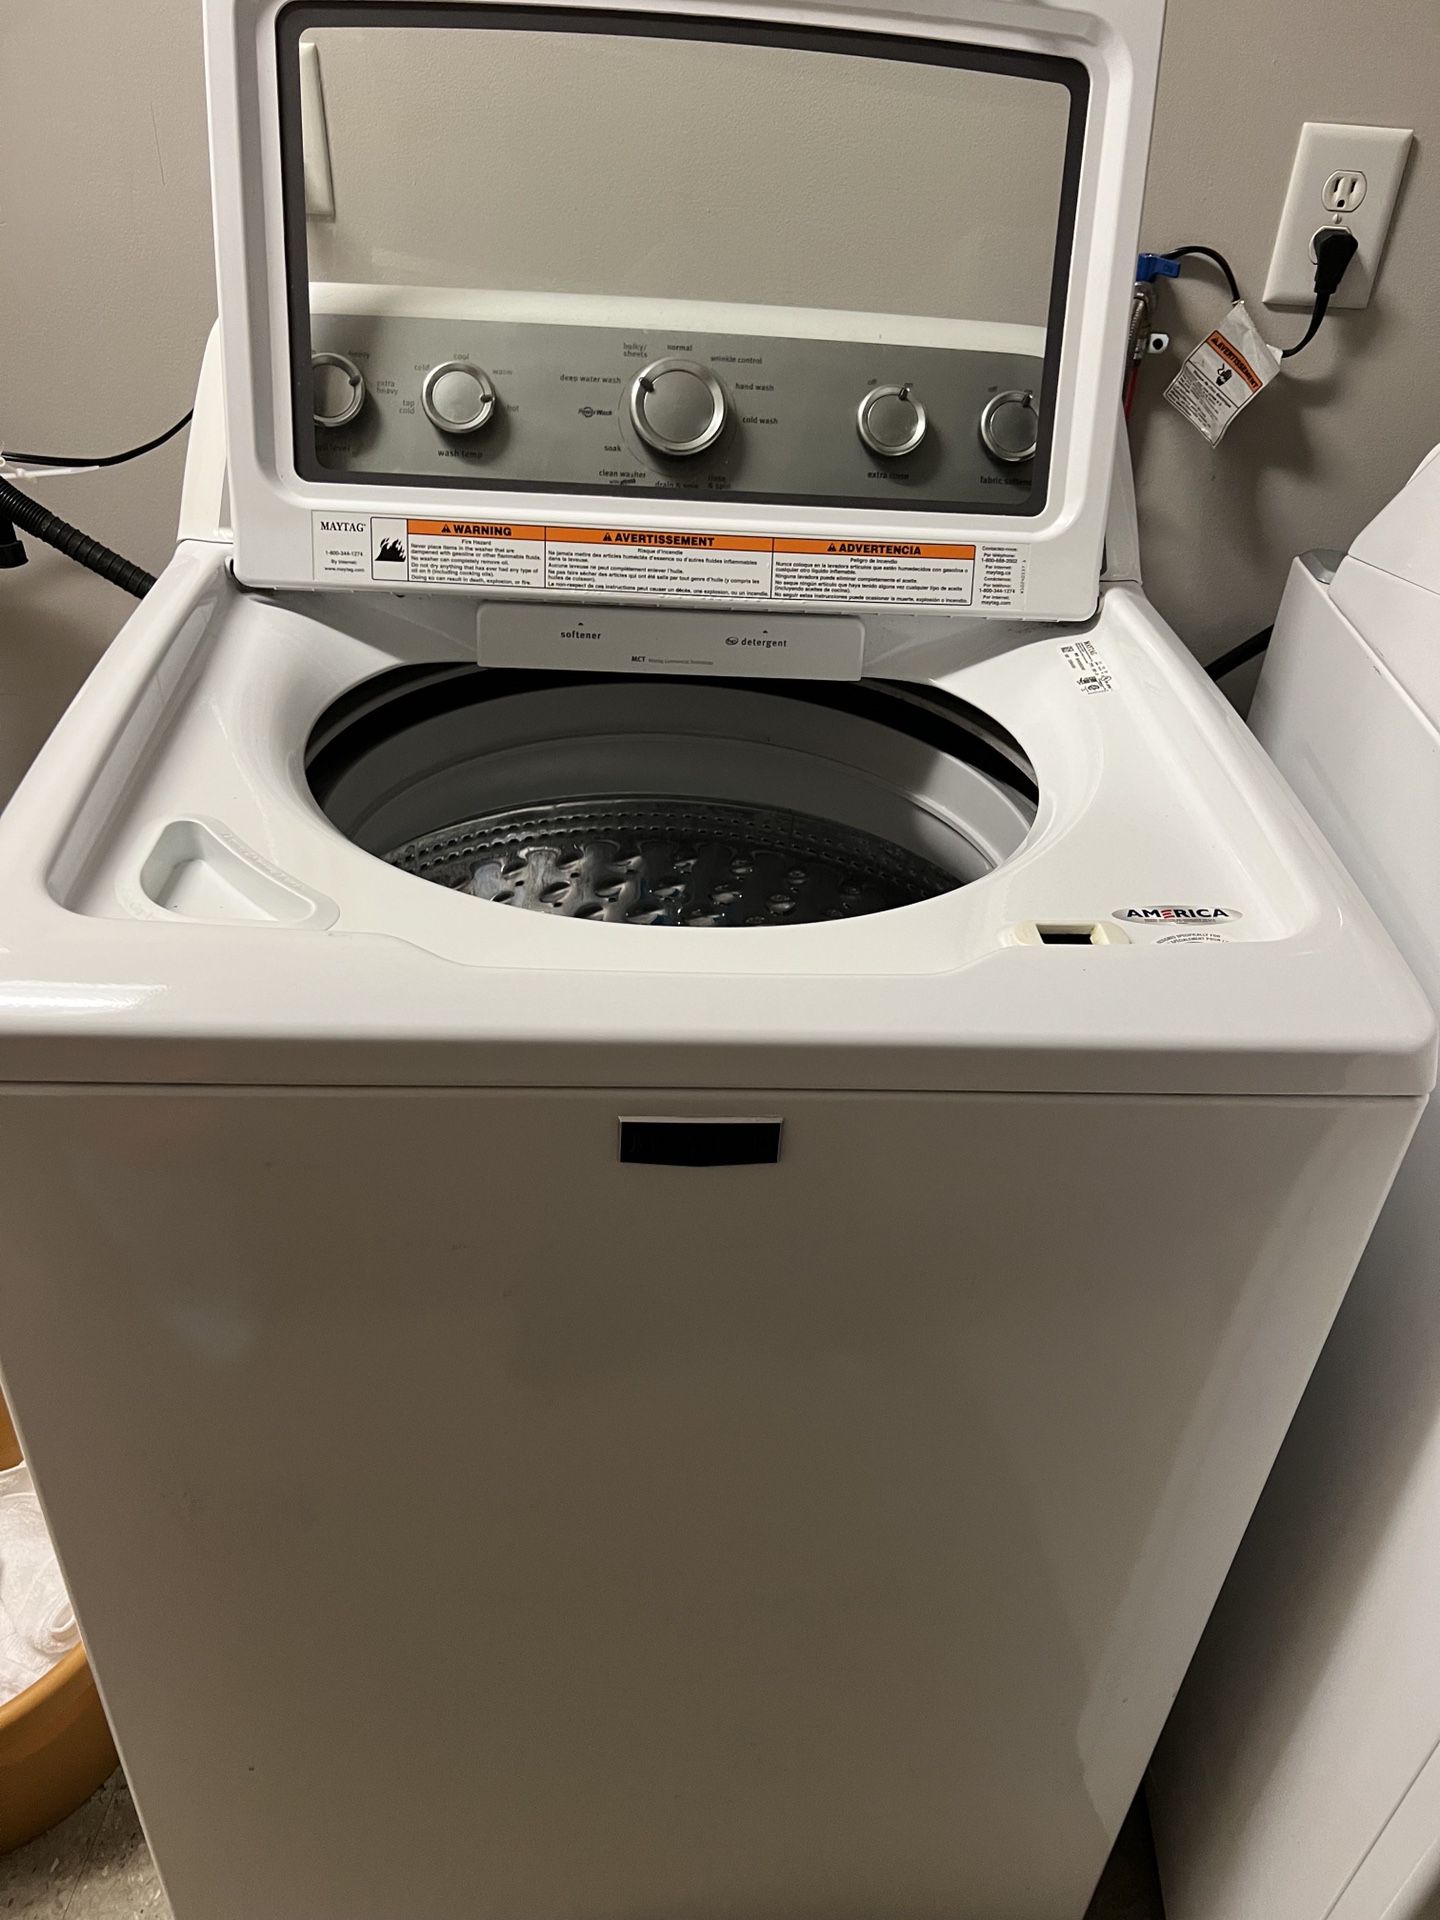 Free To Pick Up Two Used Washing Machine In Raleigh 27606